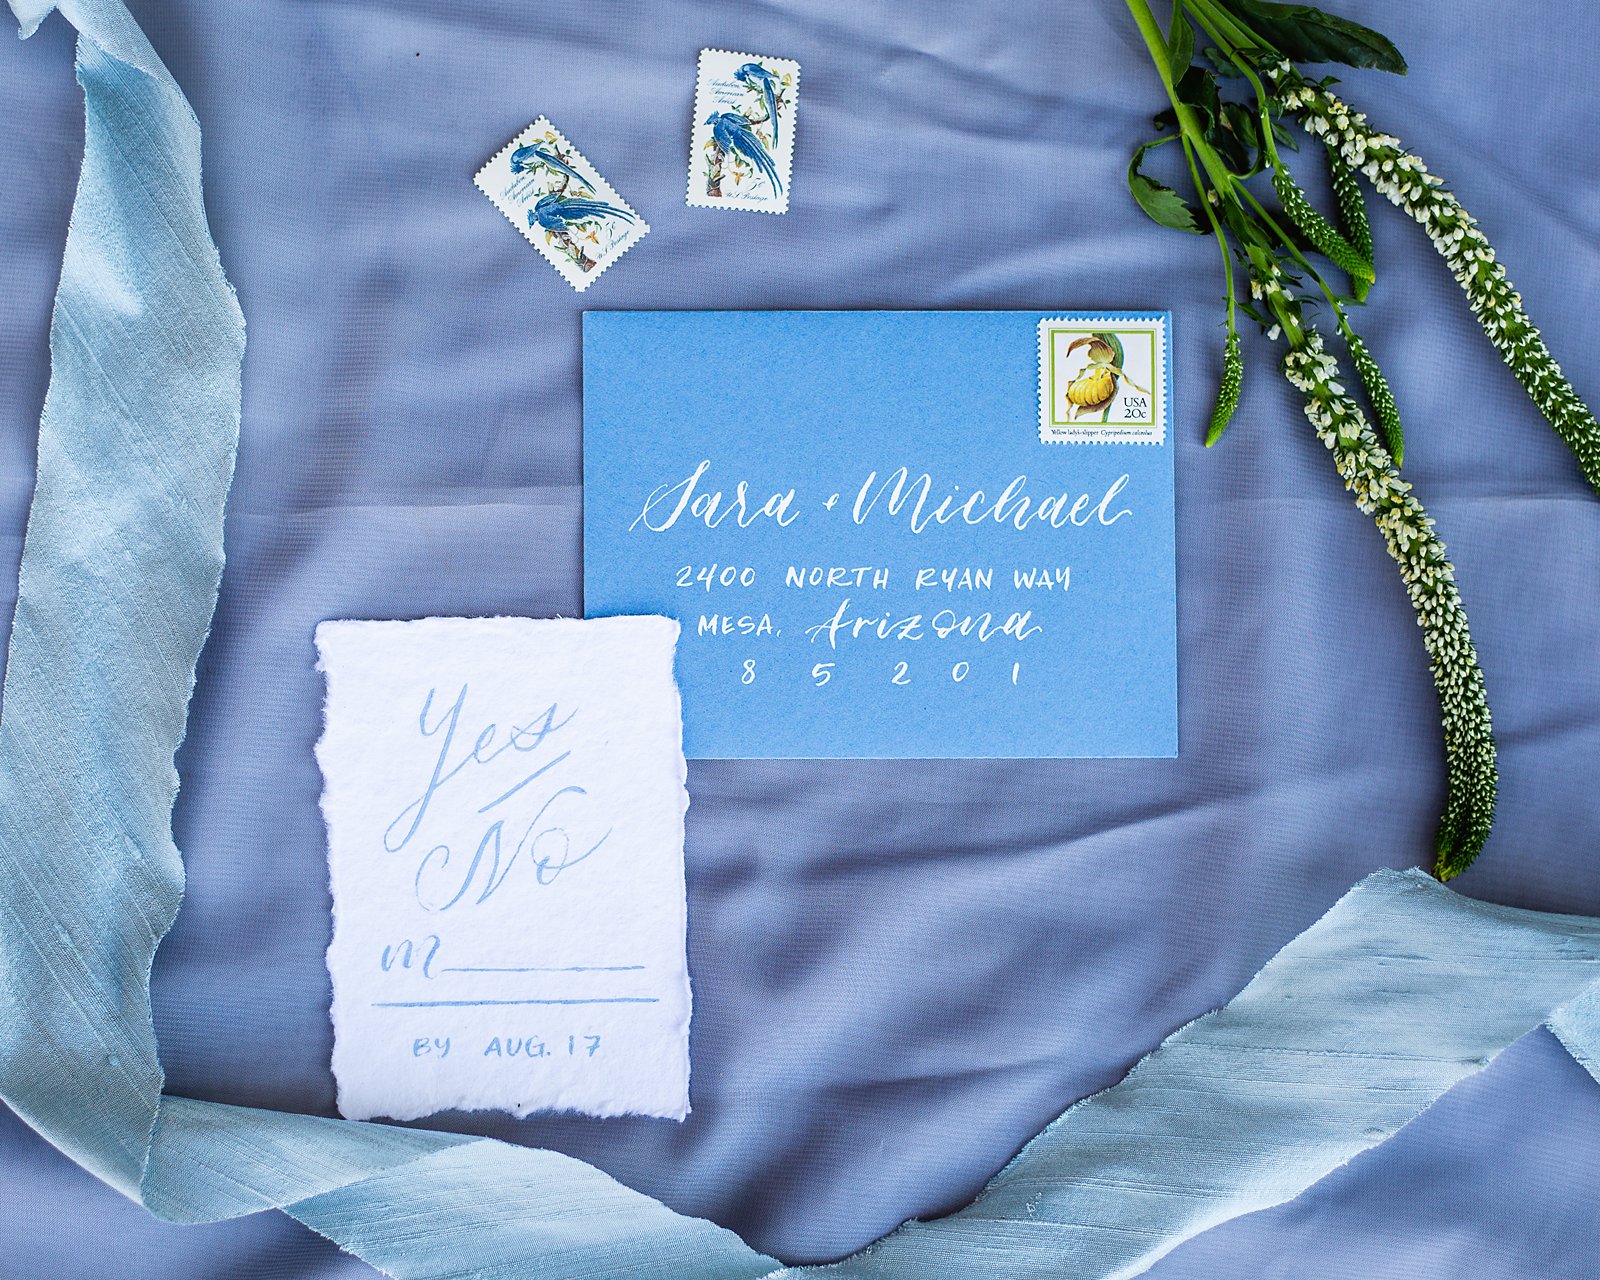 White and blue wedding invitations and stationary lay flat image by PMA Photography.